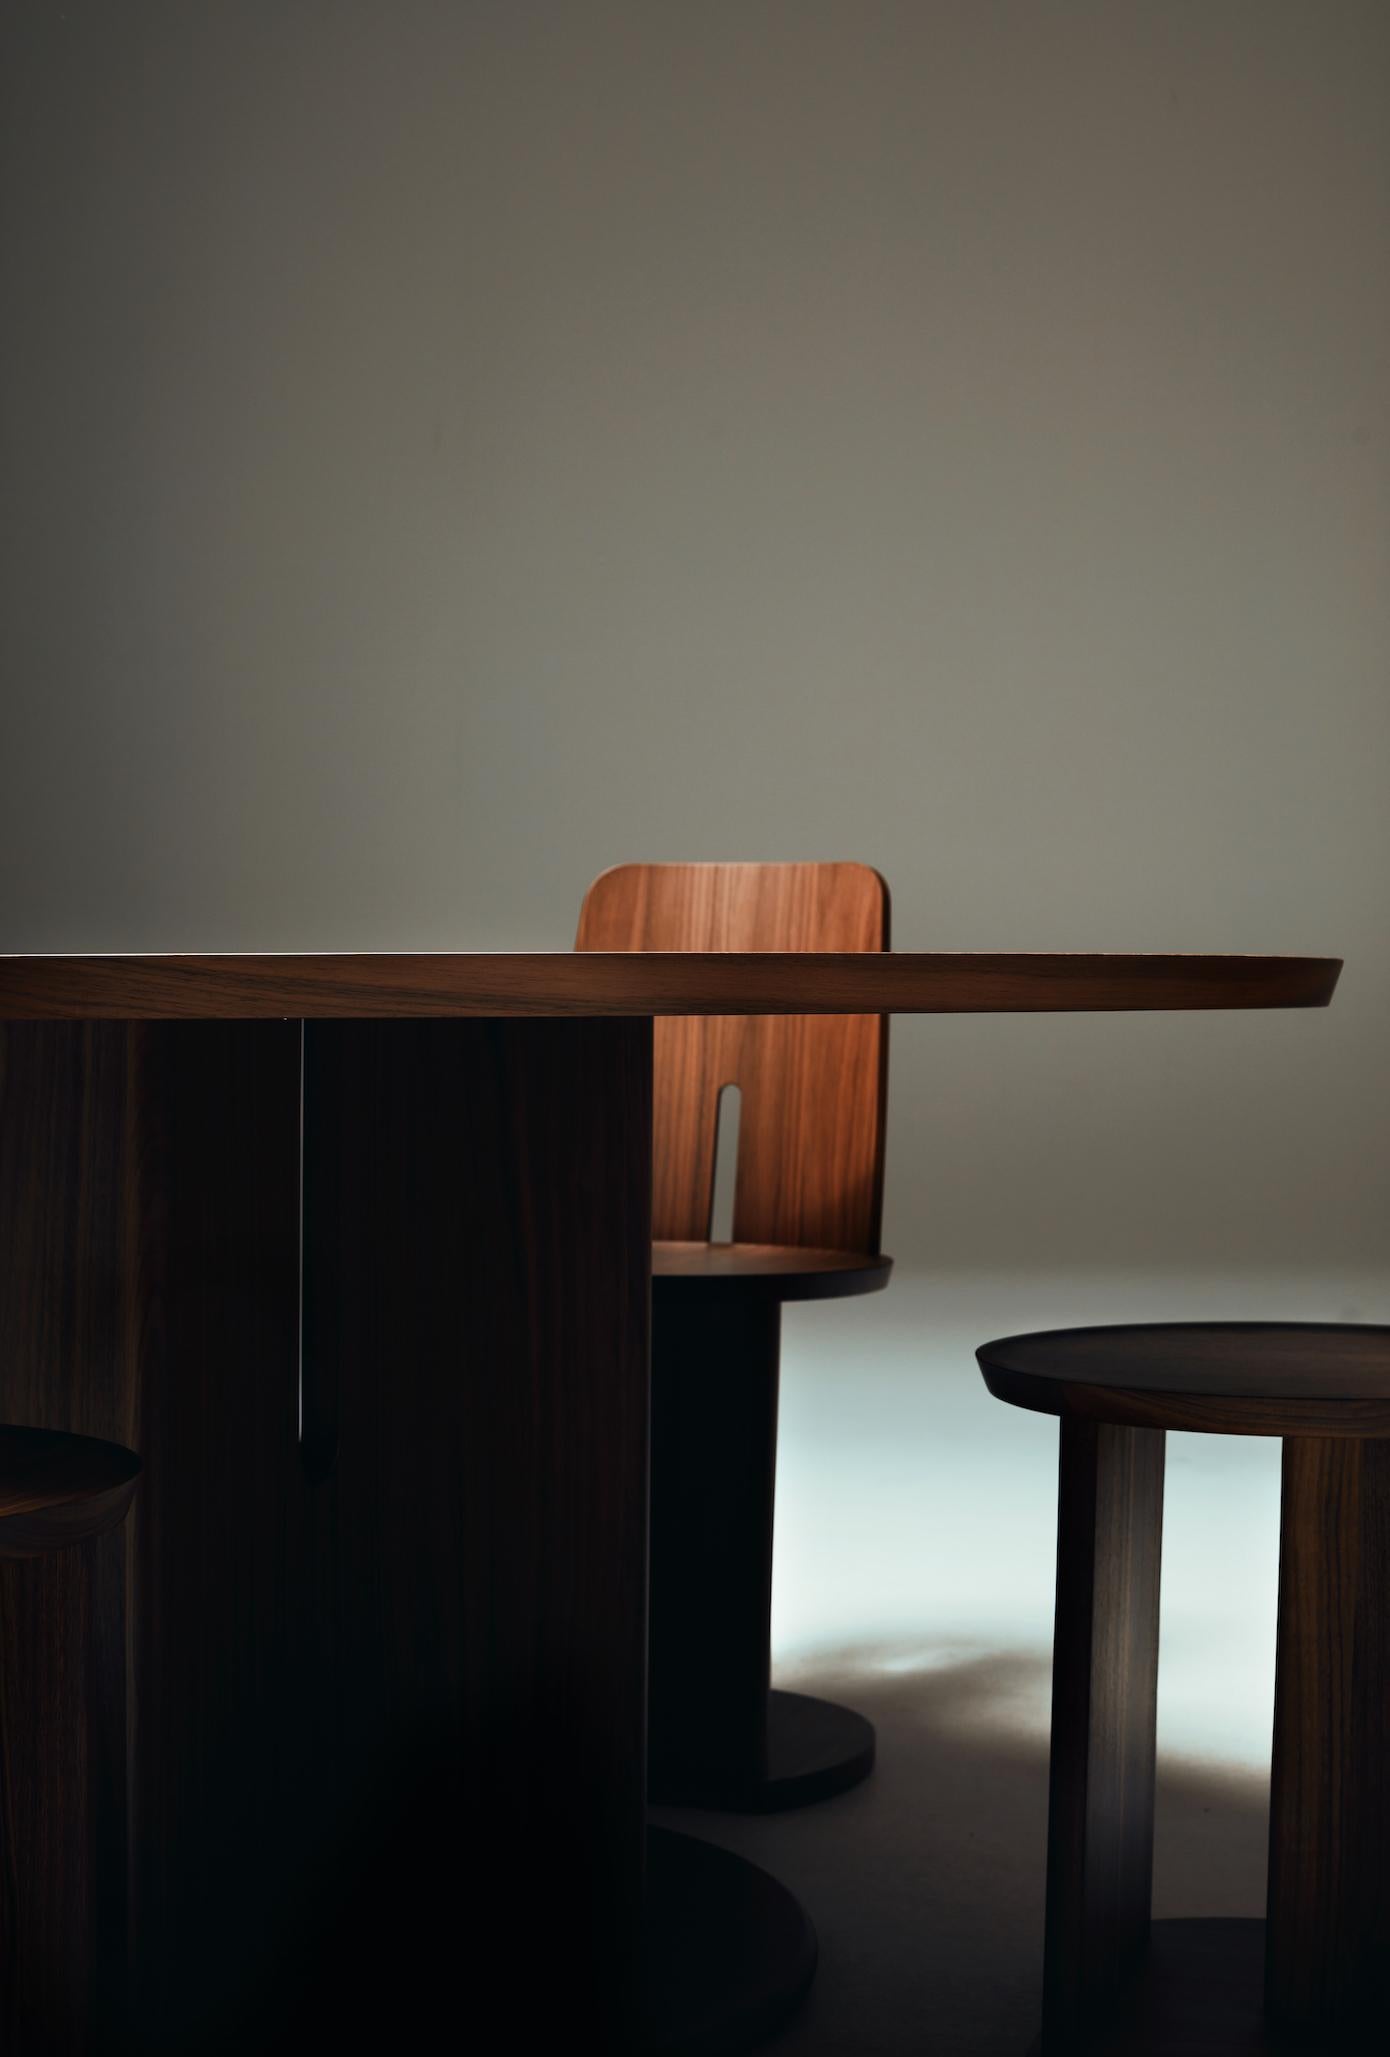 La Manufacture-Paris Intersection Canaletto Walnut Chair Designed by Neri & Hu For Sale 3